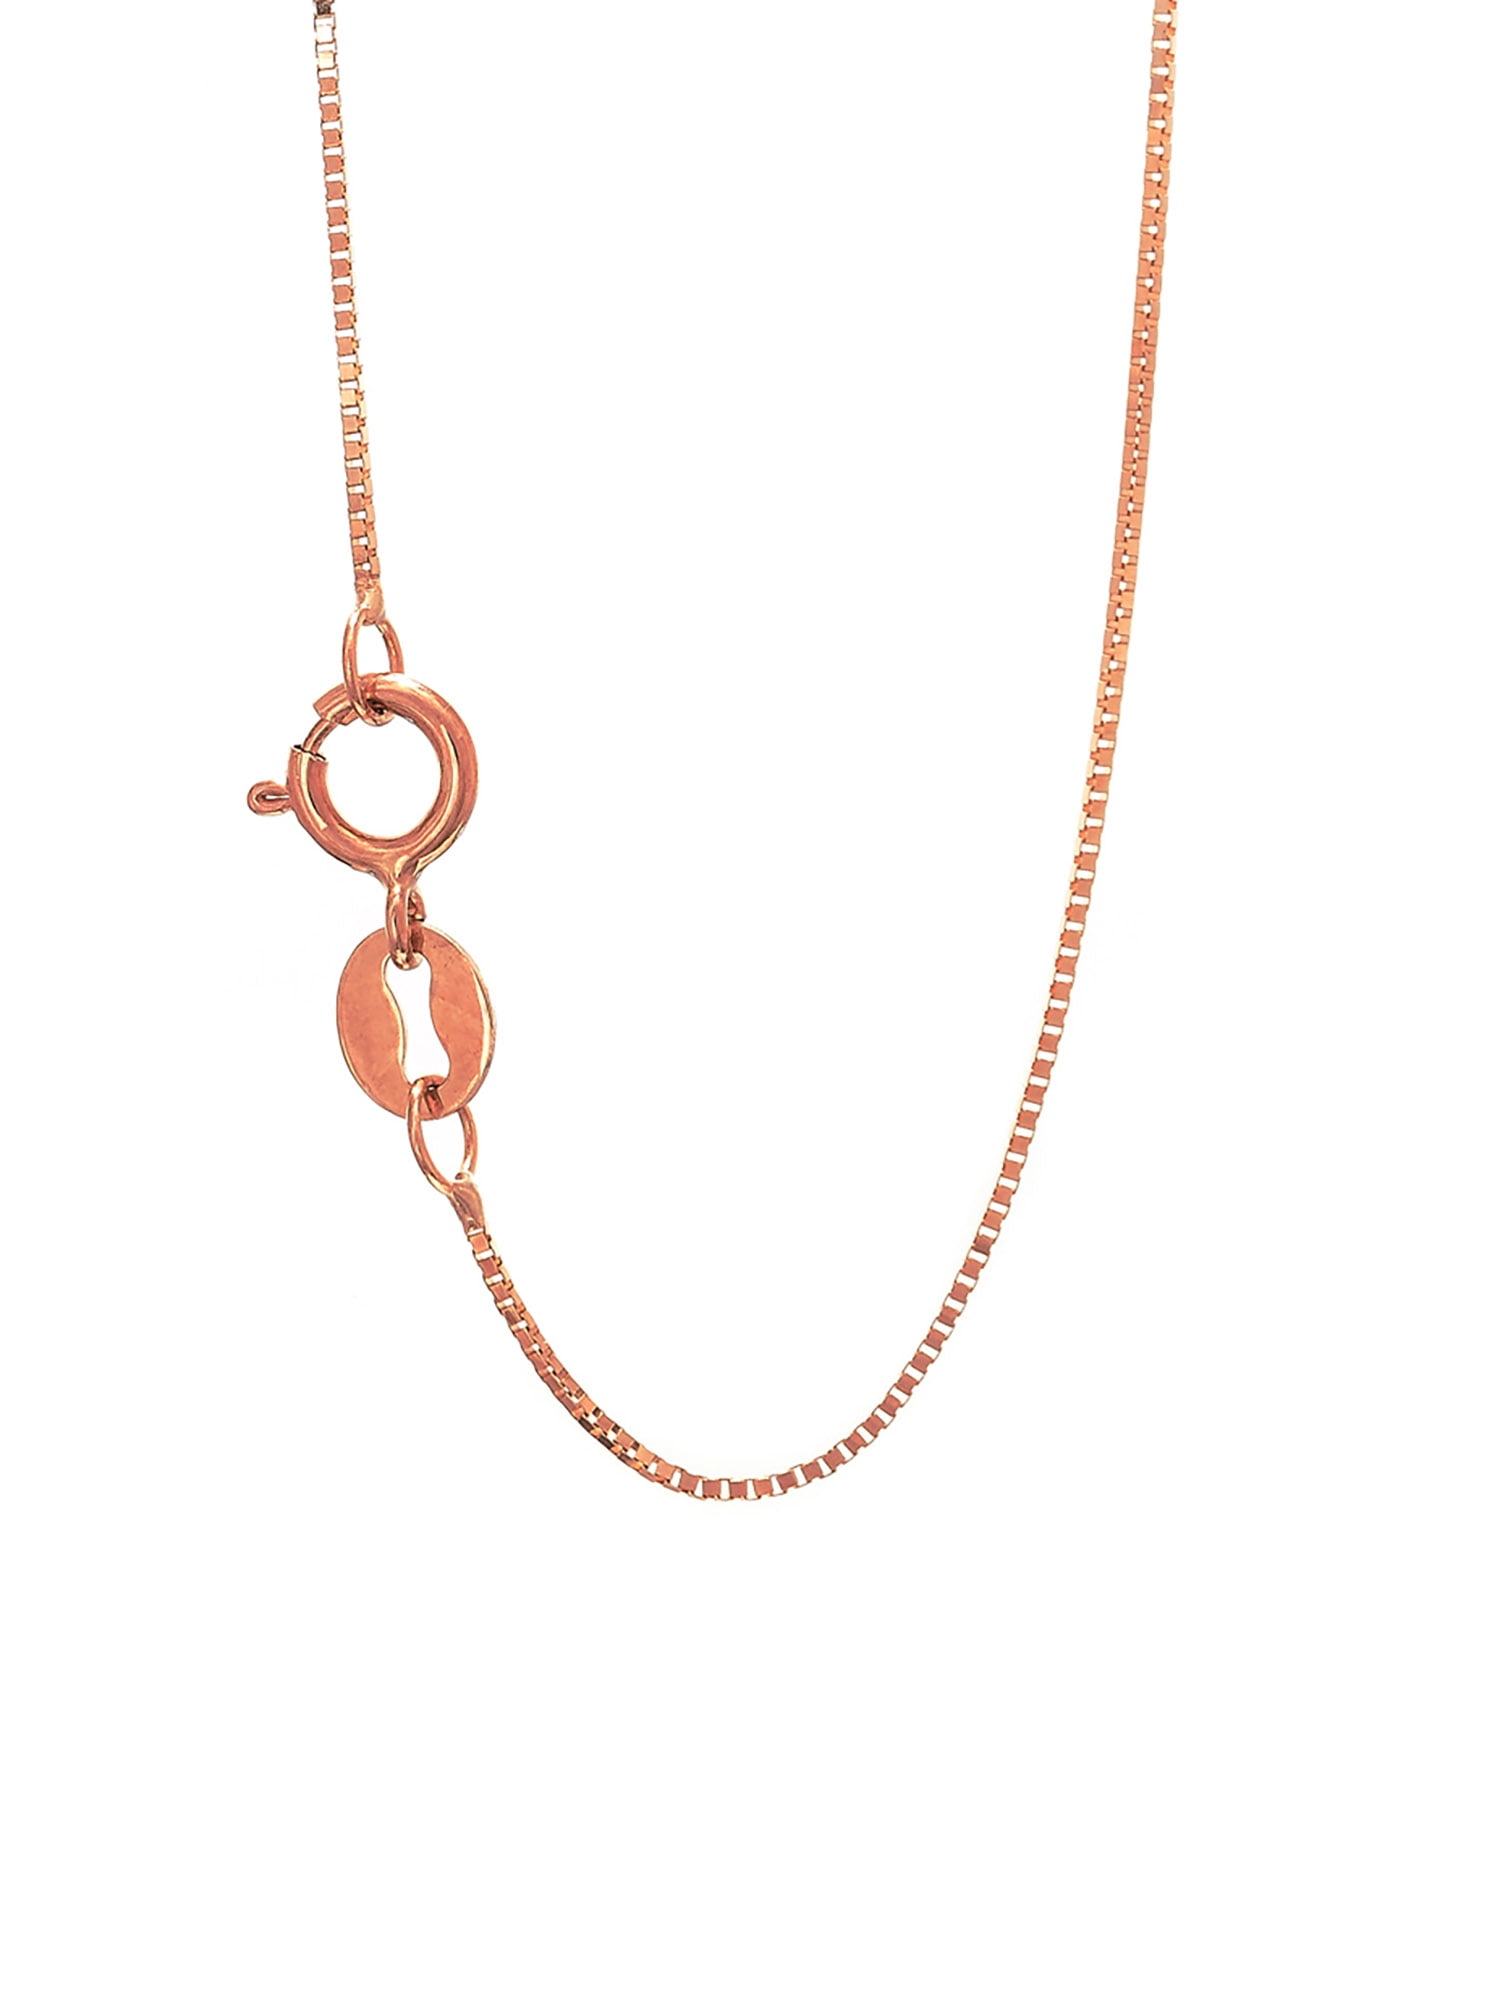 Women's Necklace Stainless Steel Classic Style Pendant Necklace Rose Gold 16"+2" 